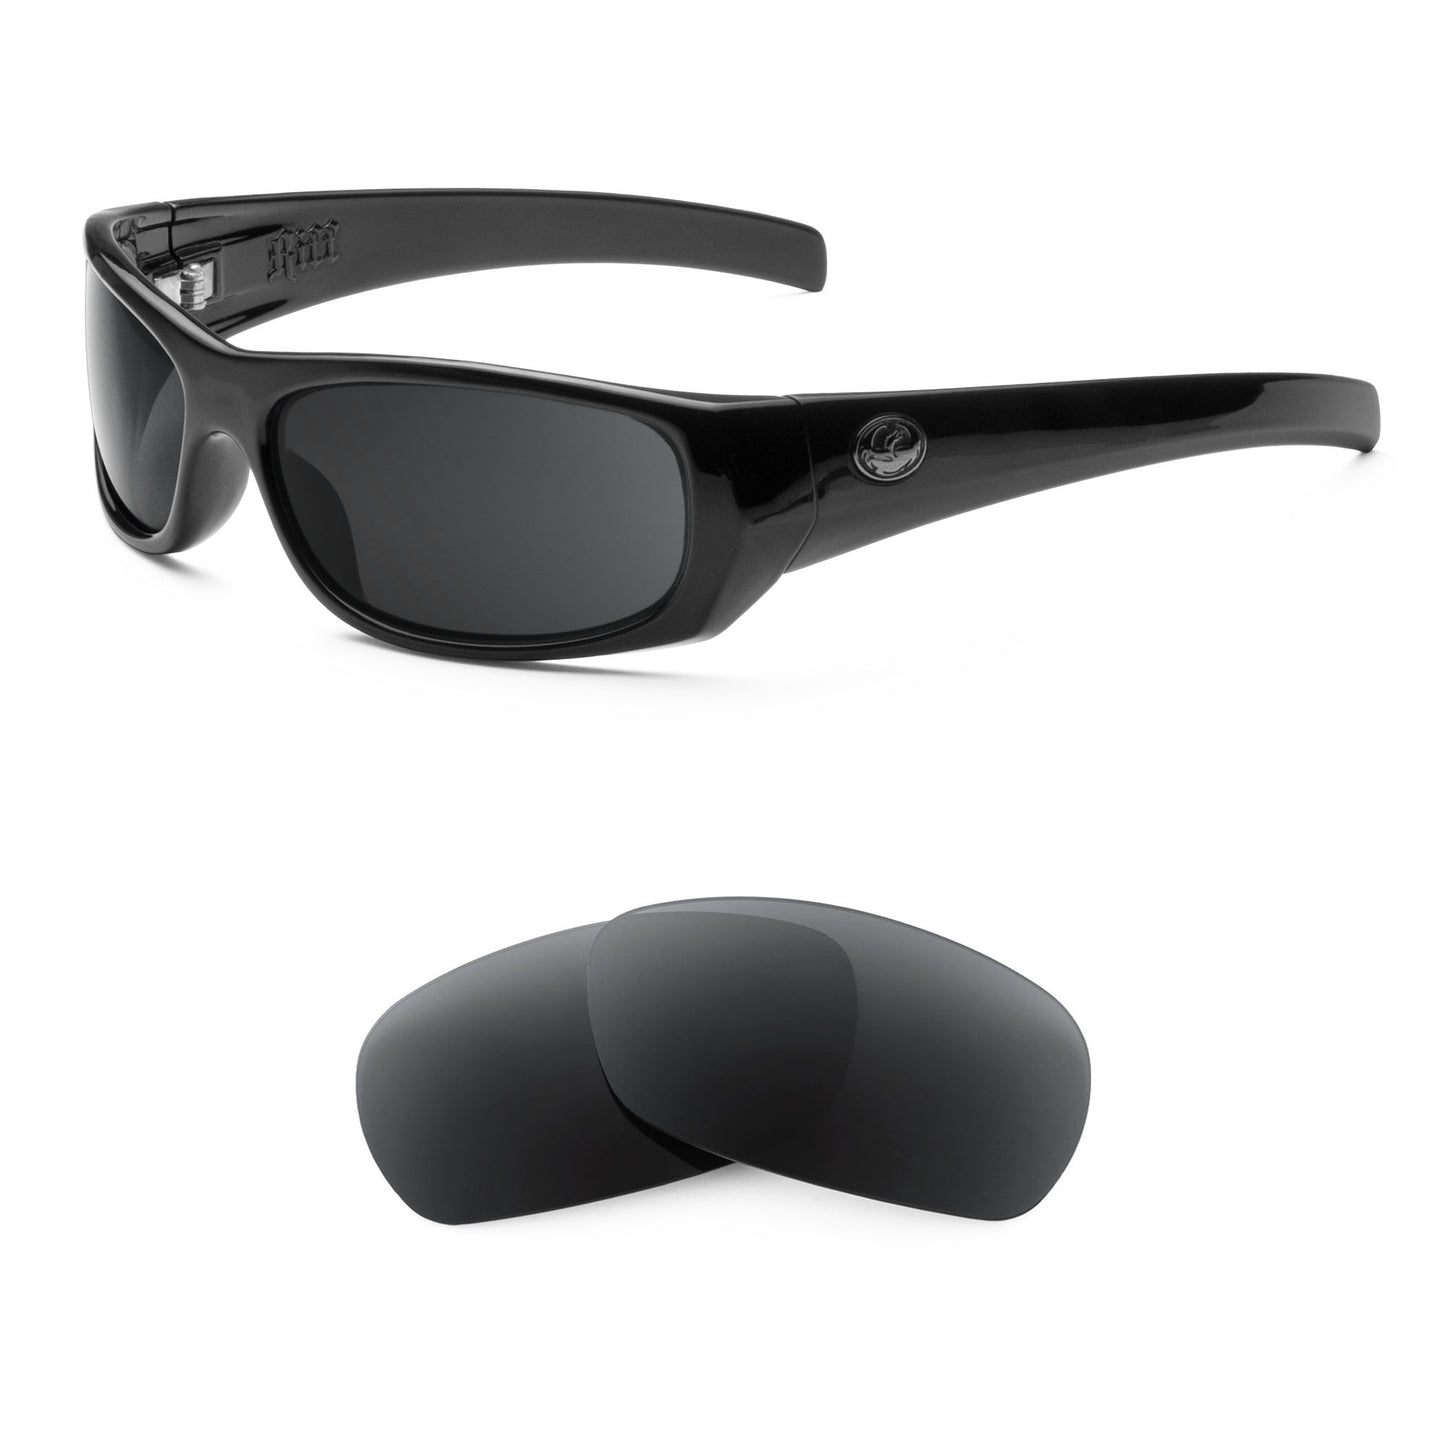 Dragon Riff sunglasses with replacement lenses